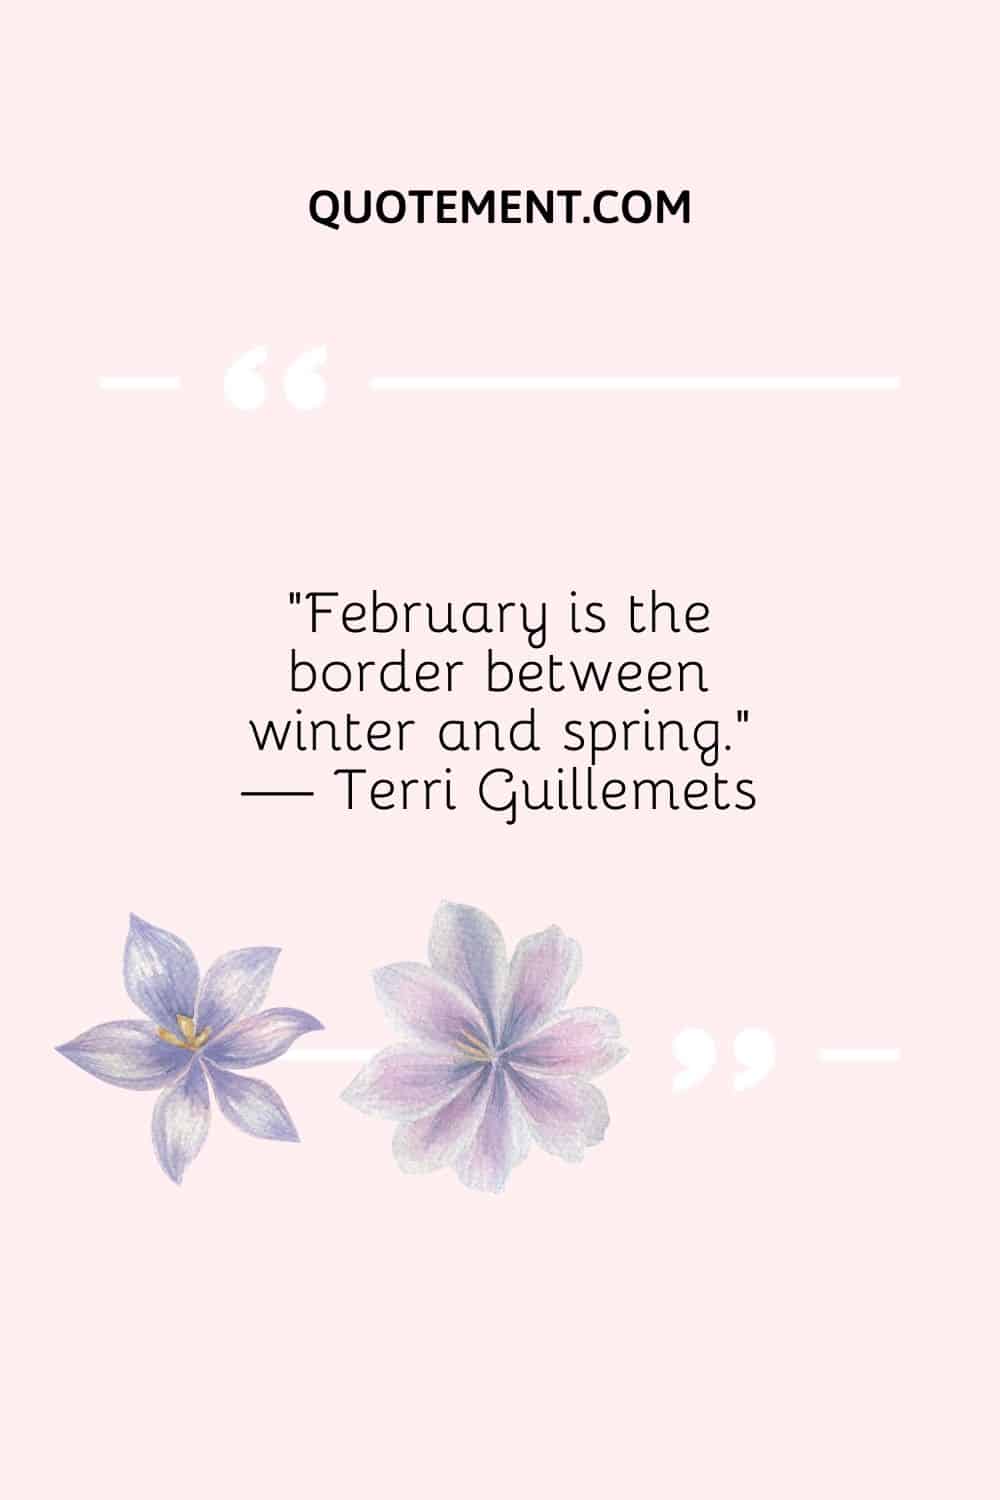 illustration of two flowers representing February inspirational quote